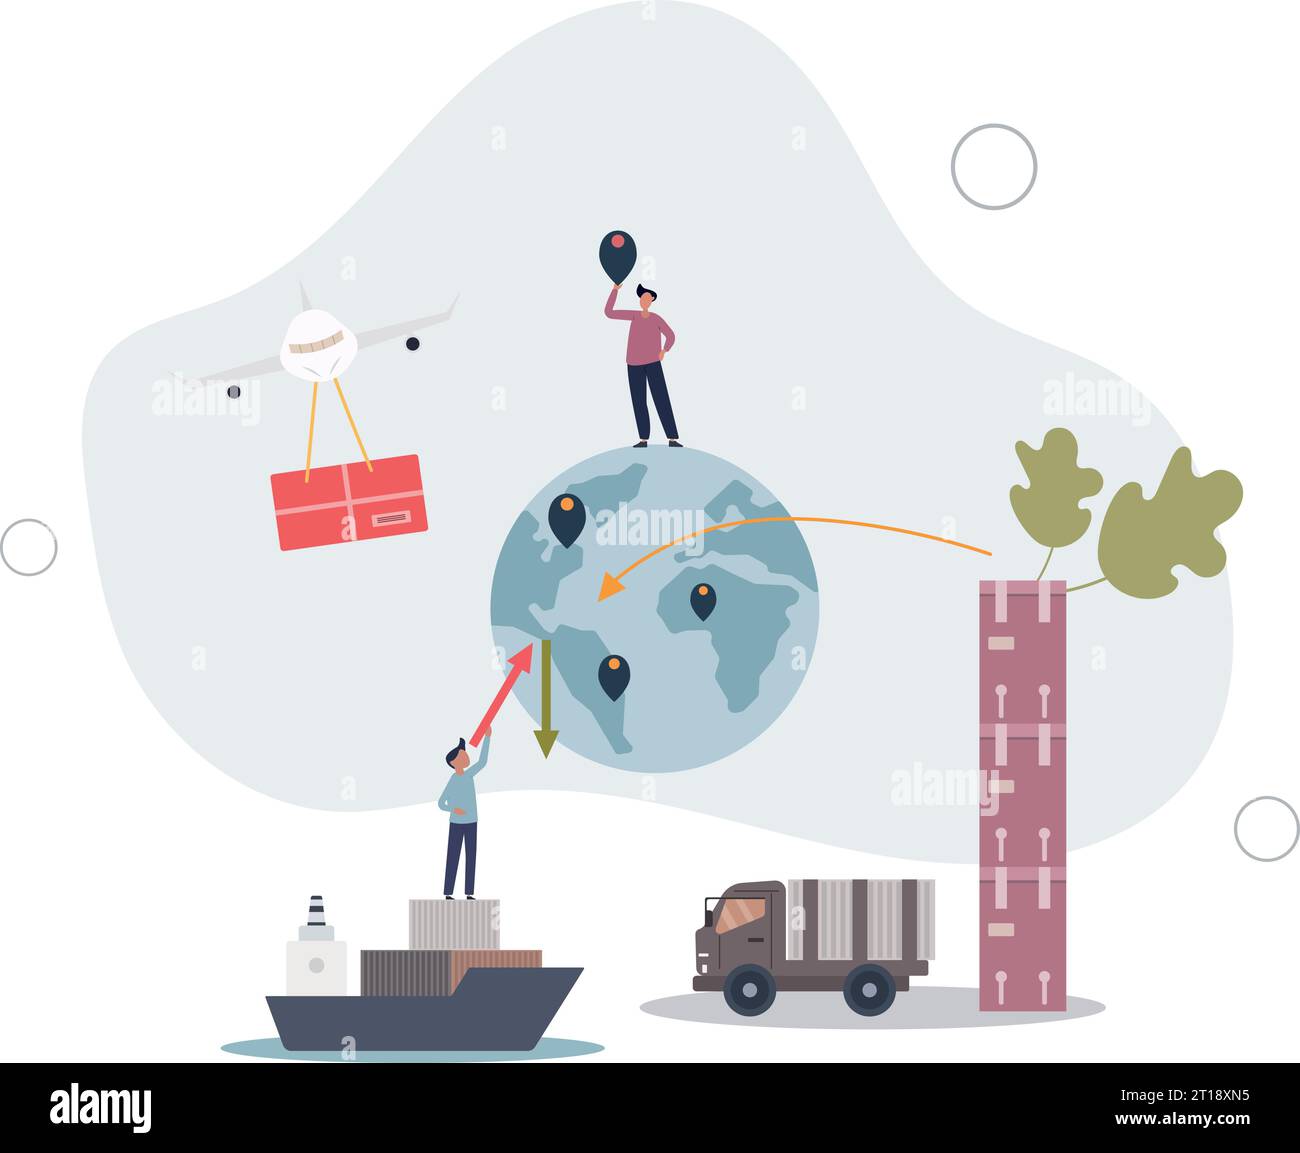 Supply chain management or SCM as logistics, warehouse inventory and sales planning .Global transportation network with export. Stock Vector